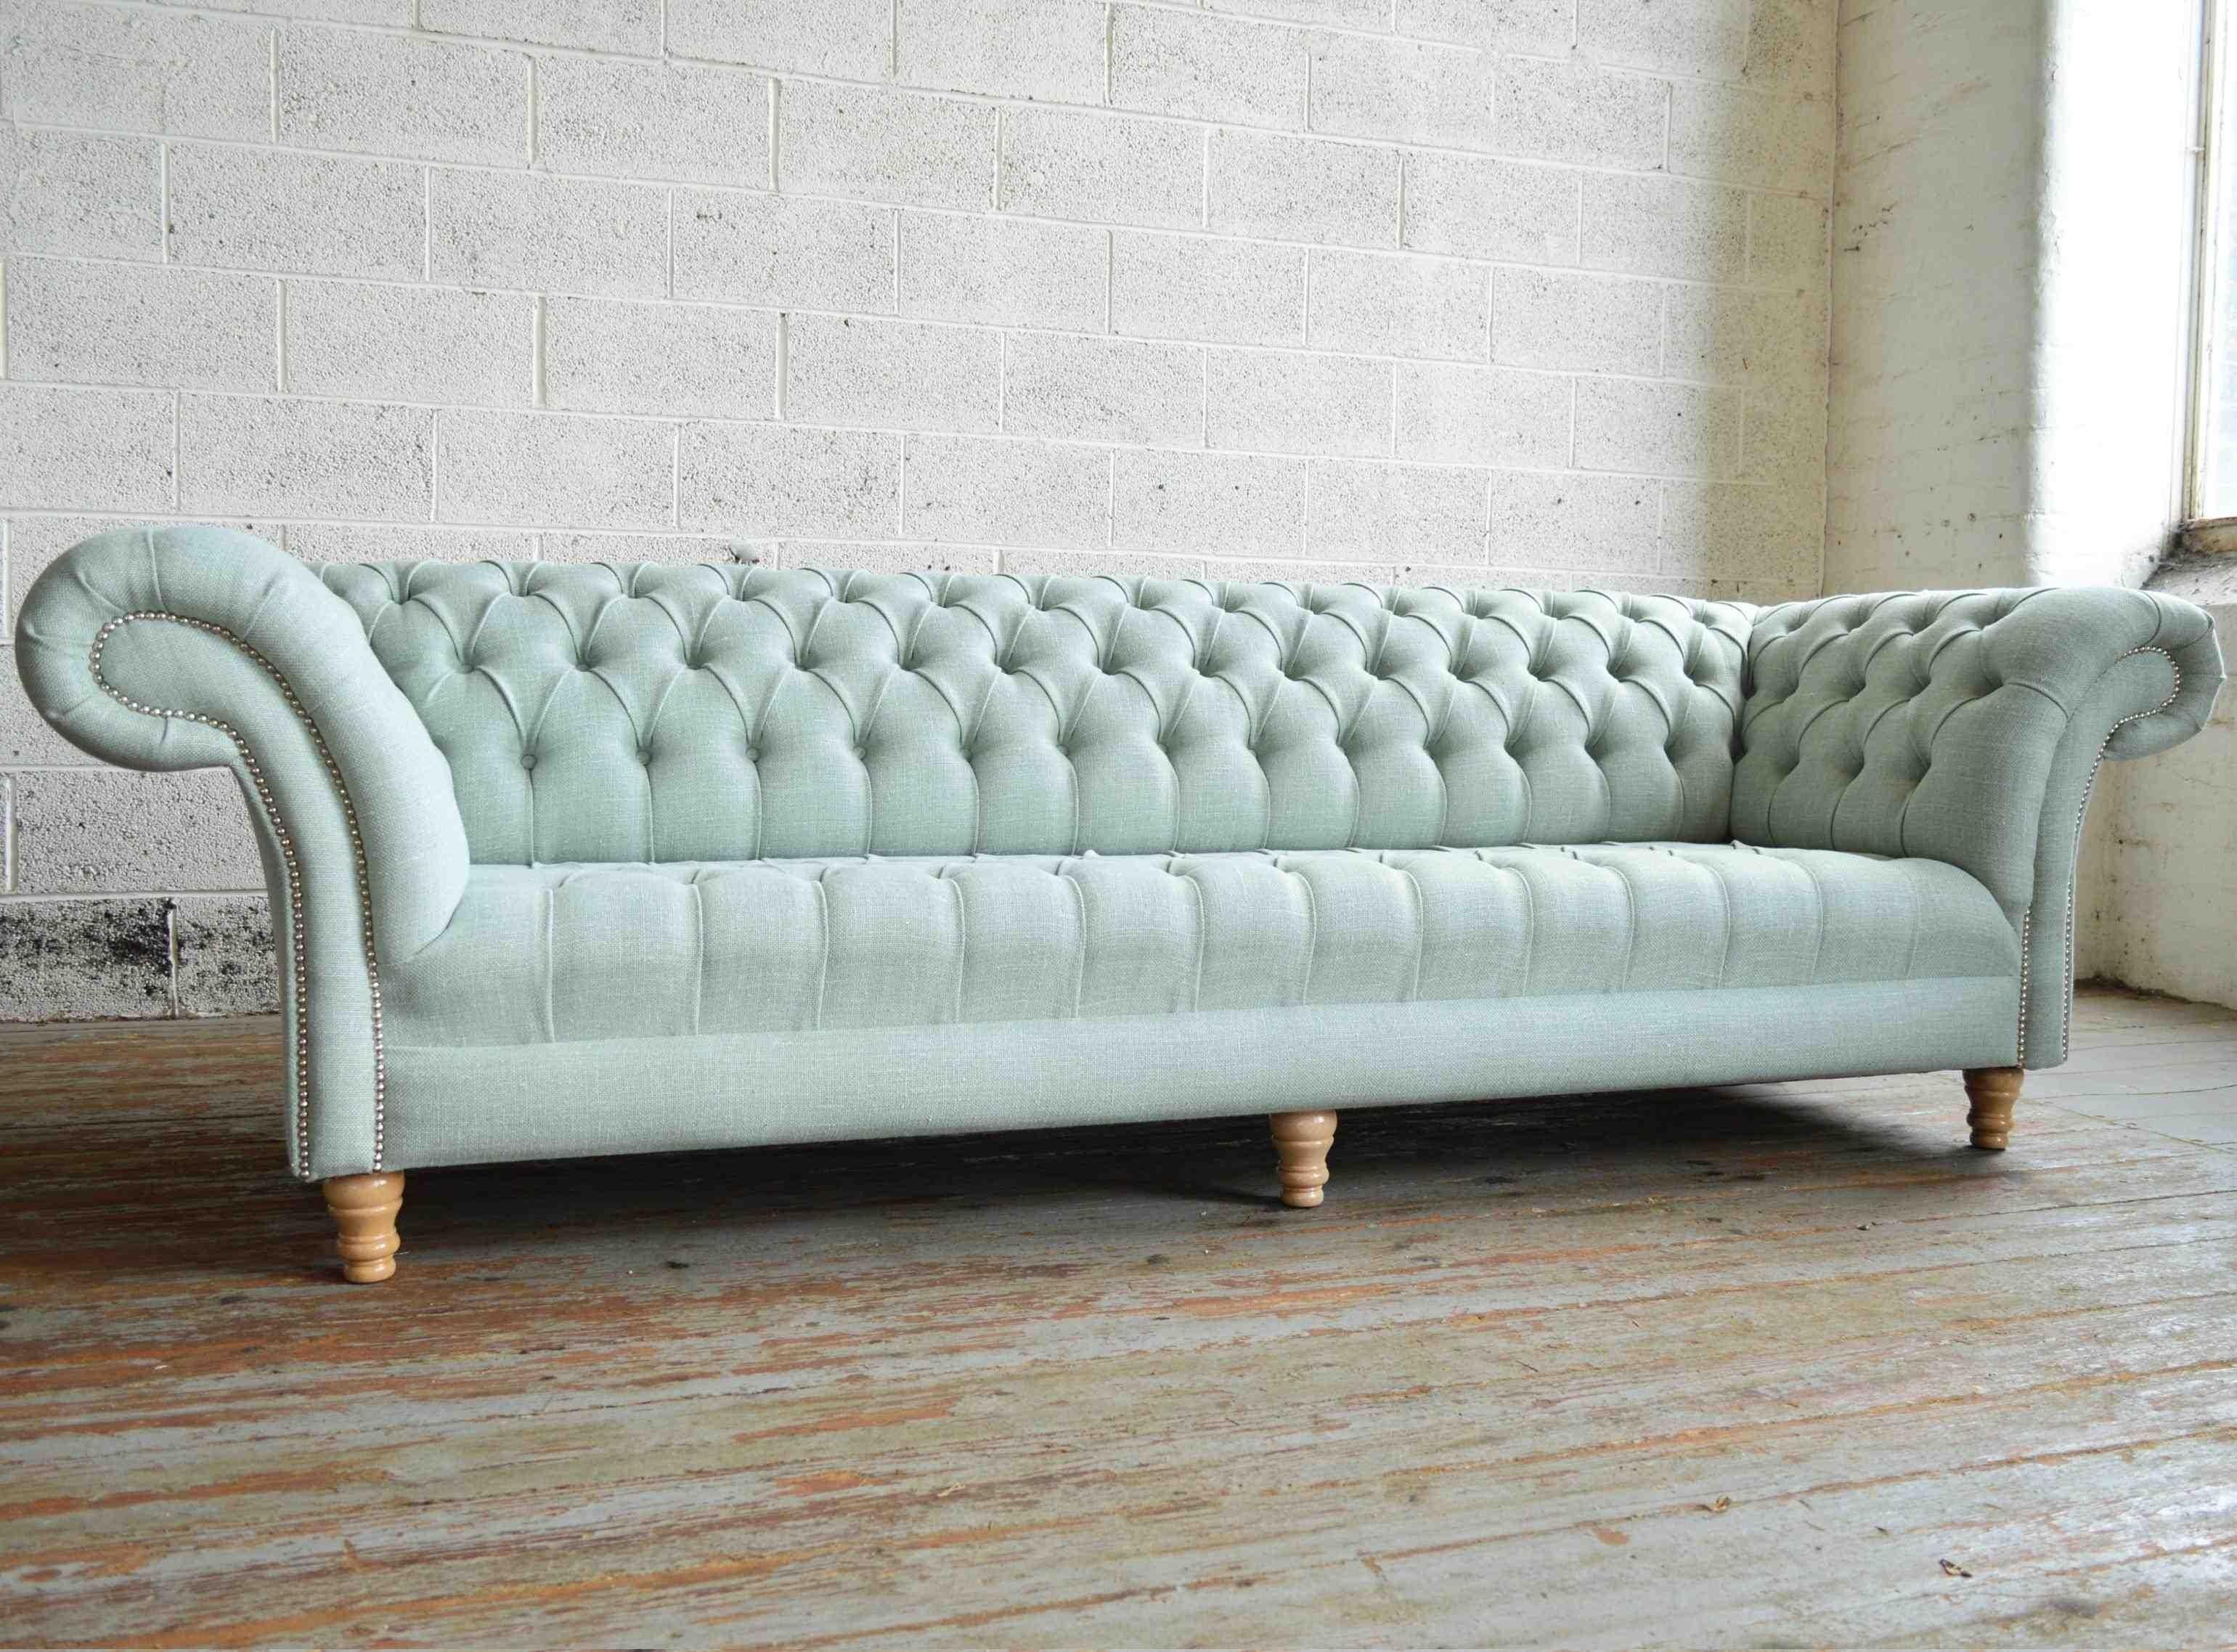 Home Design : Grey Velvet Chesterfield Sofa Eclectic Medium Grey Intended For Purple Chesterfield Sofas (View 16 of 20)